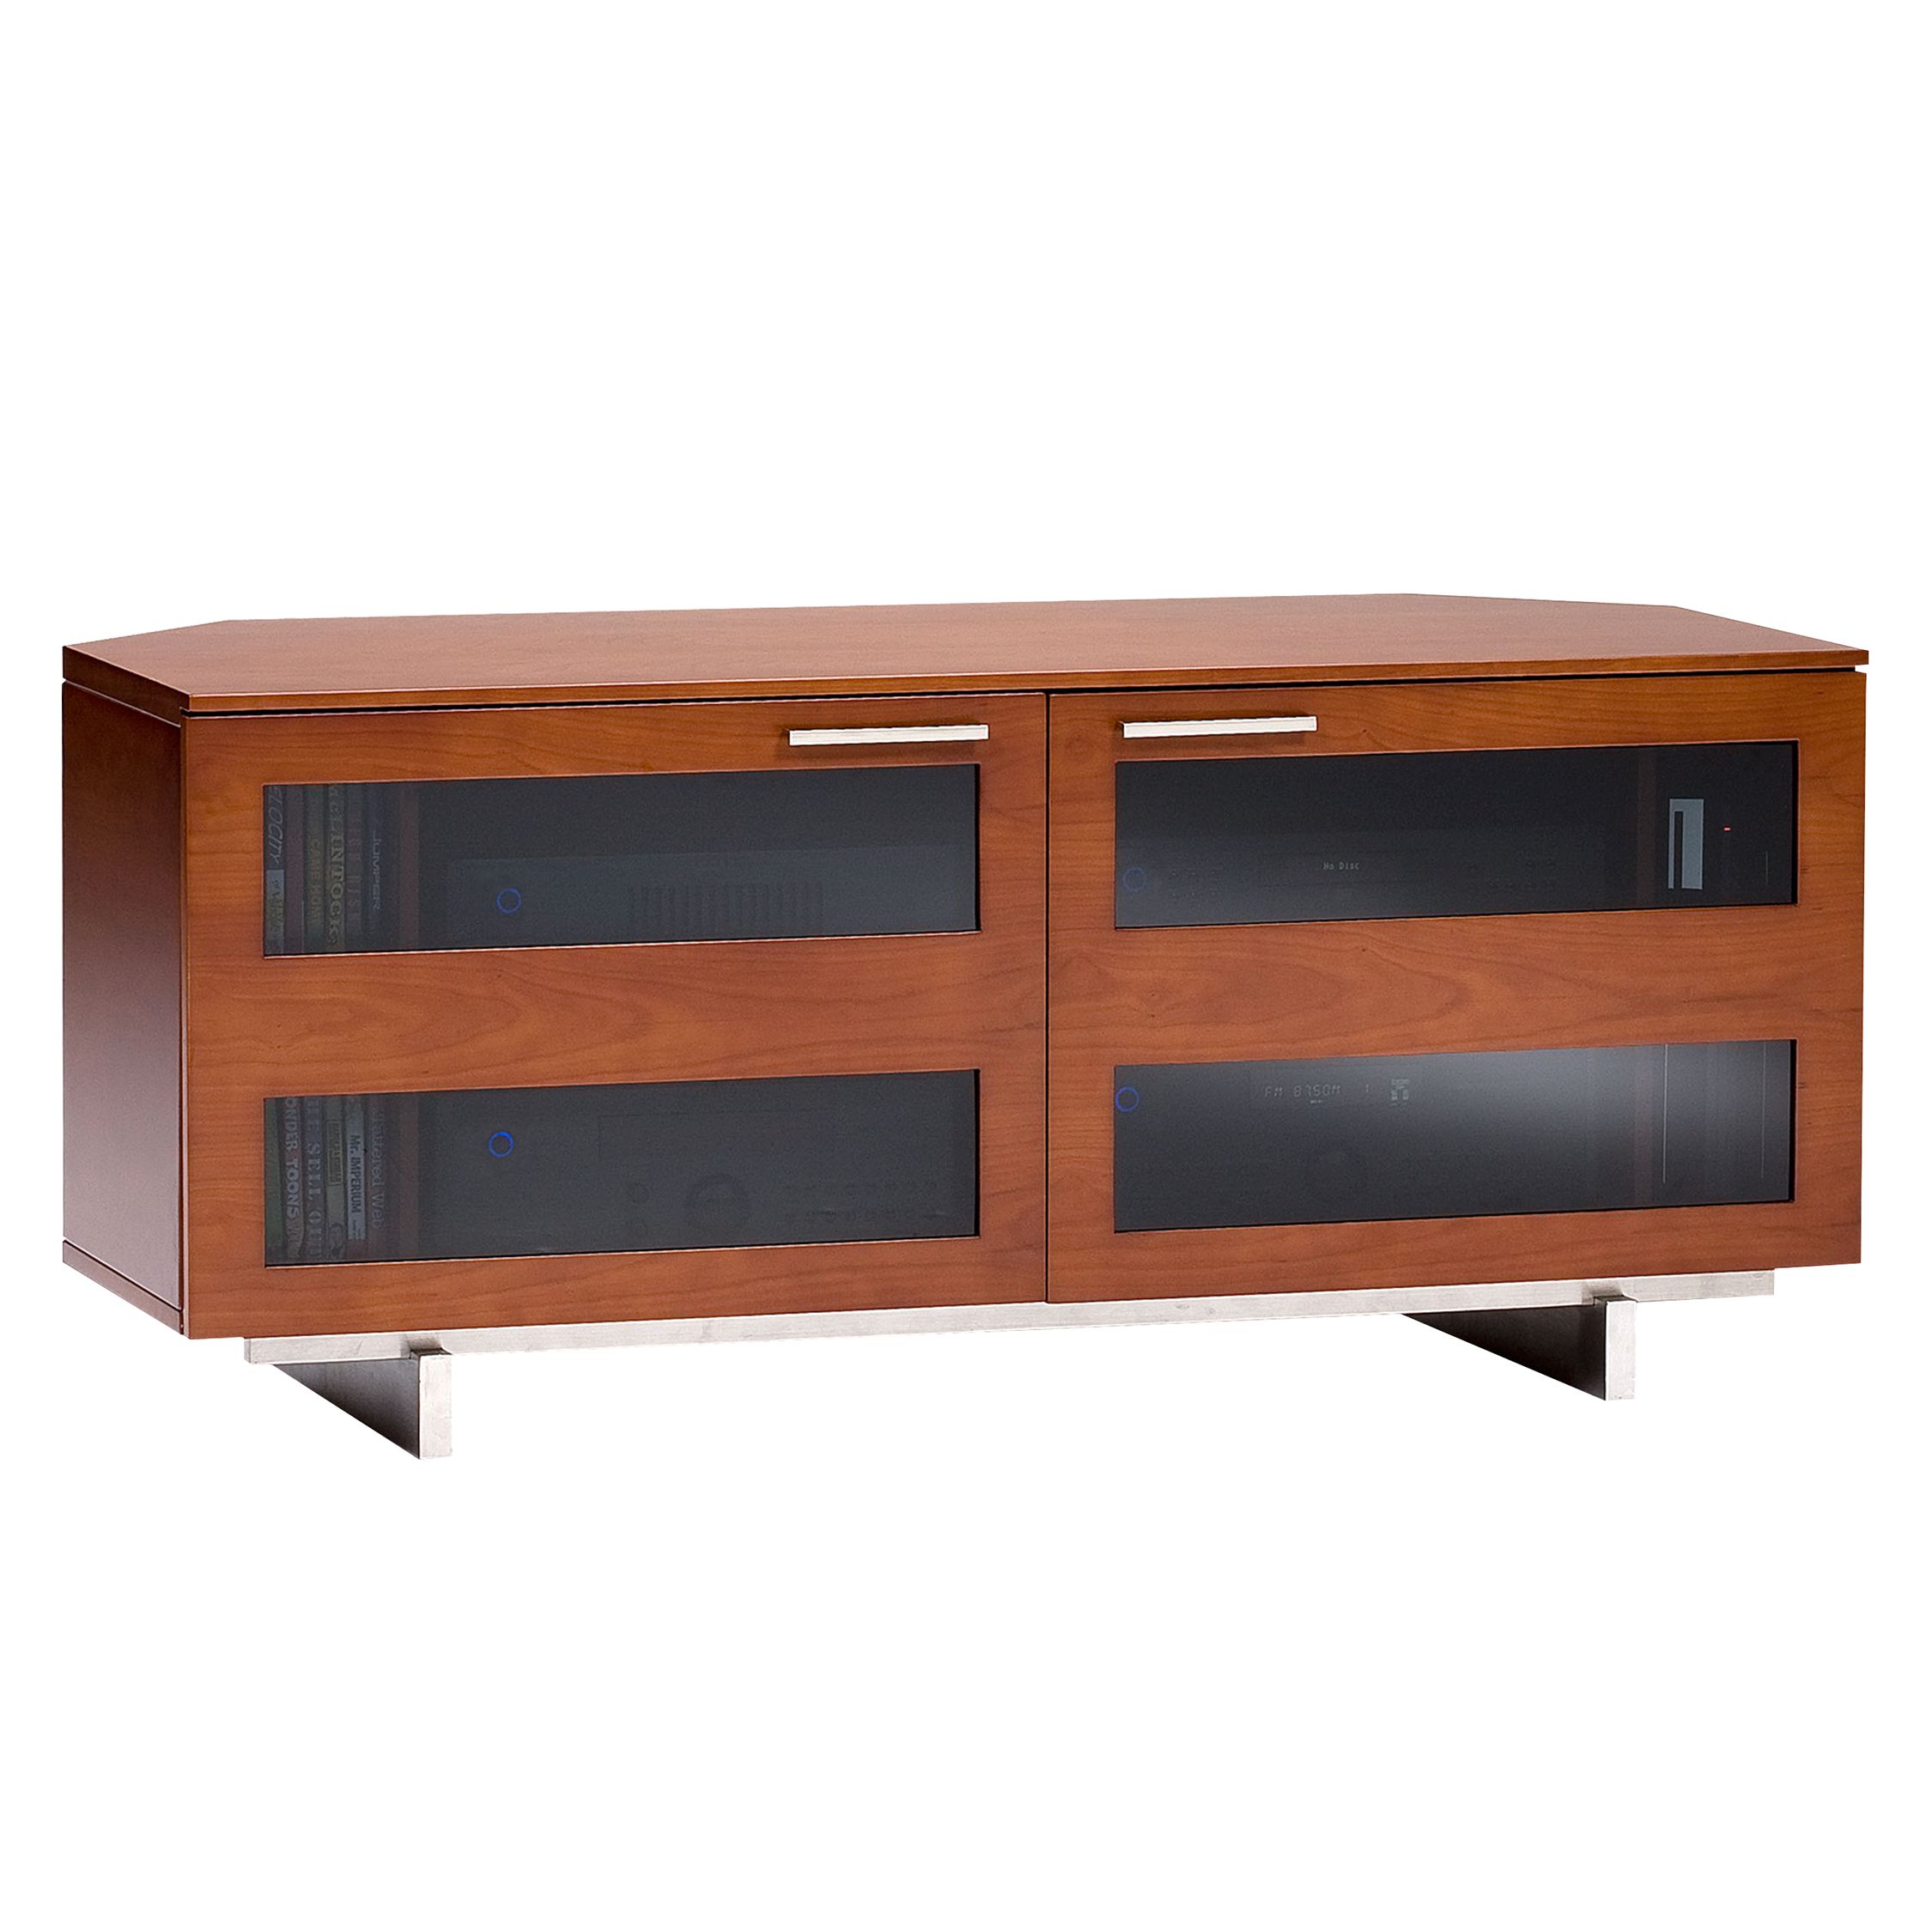 BDI Avion II 89425/EO Stained Cherry Television Stand, Espresso Finish at John Lewis